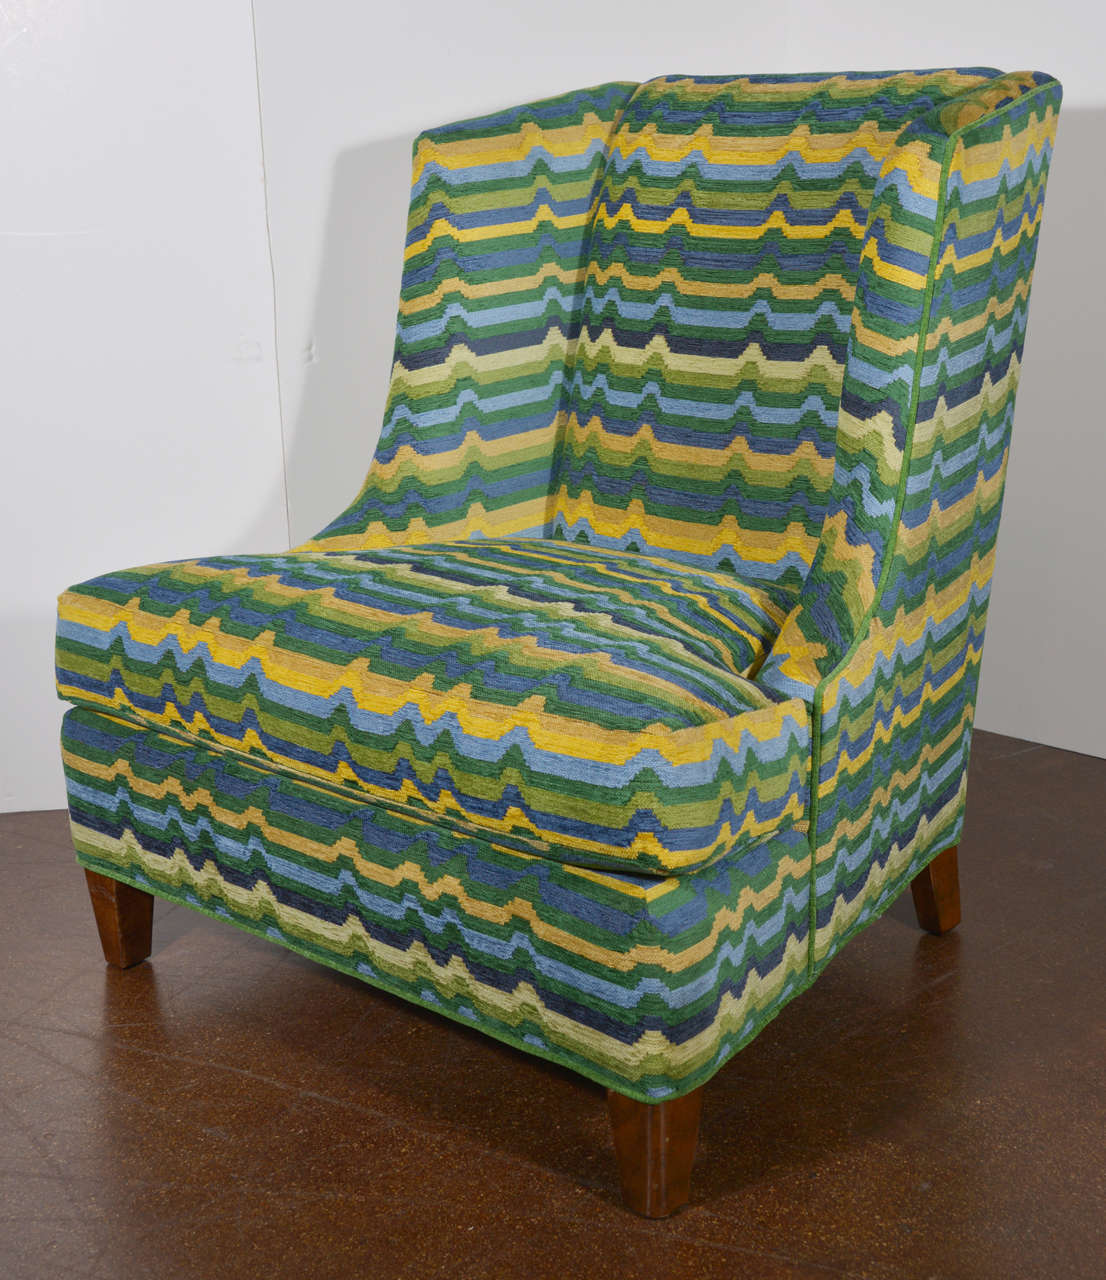 Contemporary Wesley Hall Chair